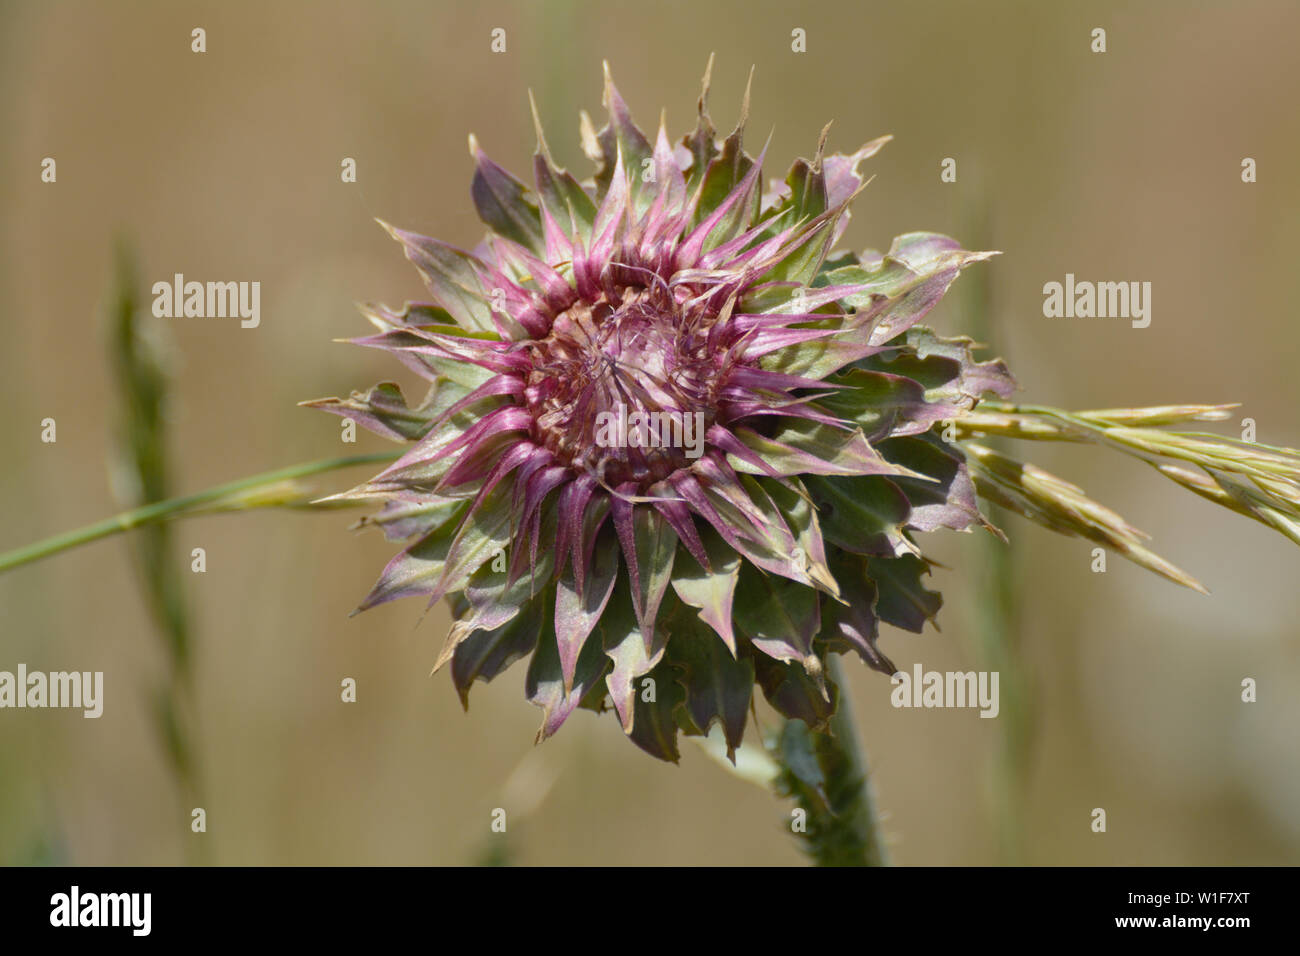 Musk thistle or Carduus nutans flower on field of wild grass and wheat Stock Photo